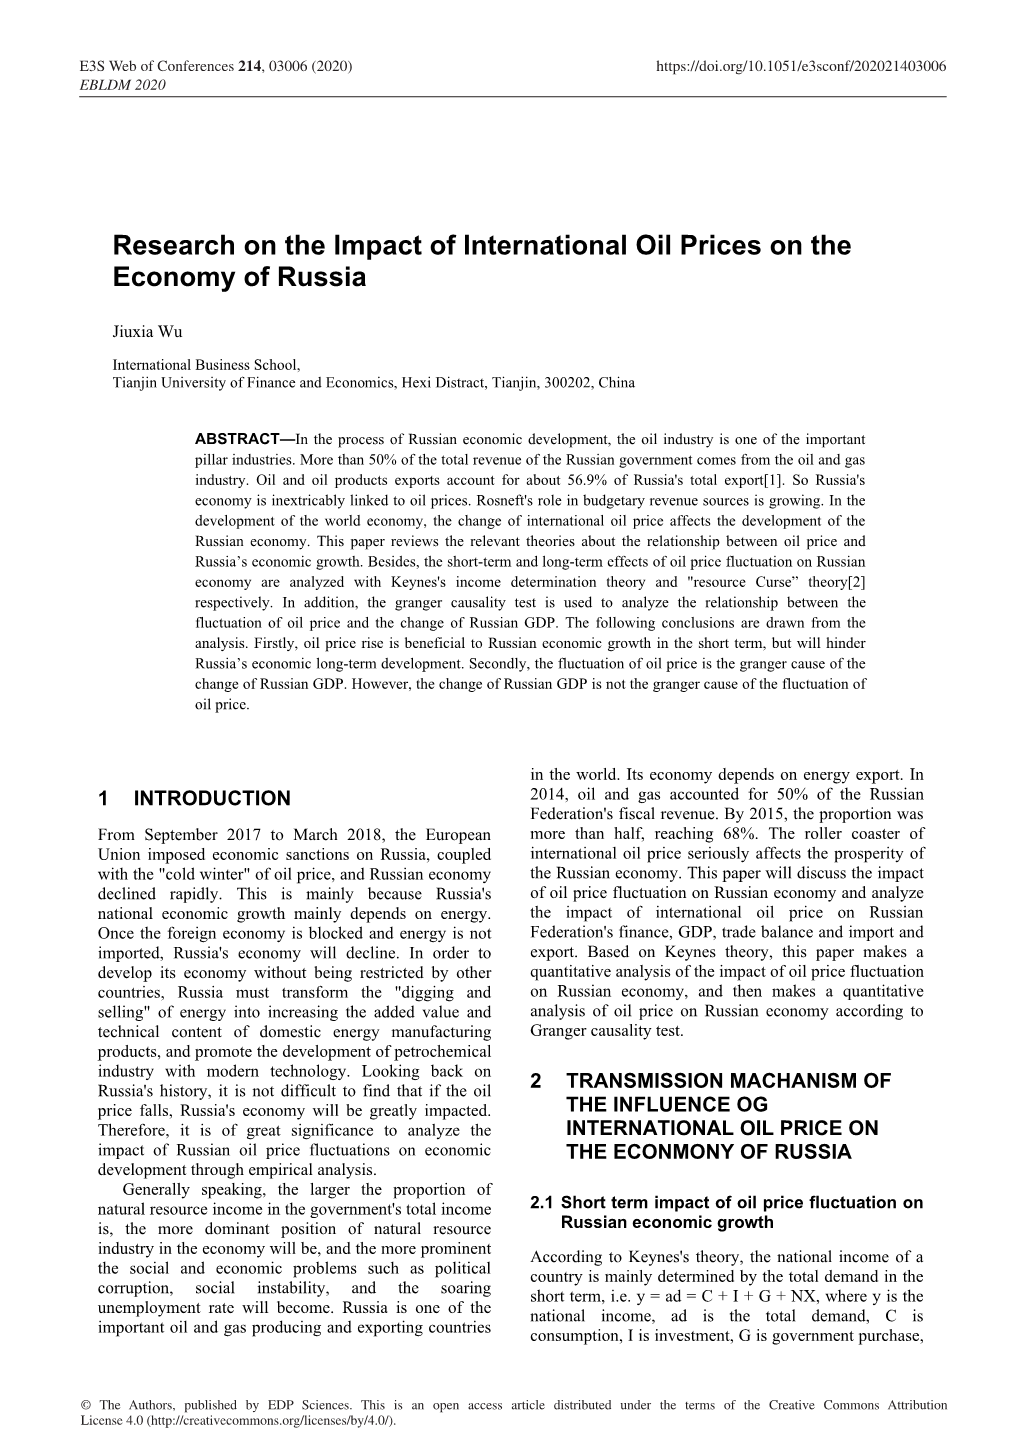 Research on the Impact of International Oil Prices on the Economy of Russia